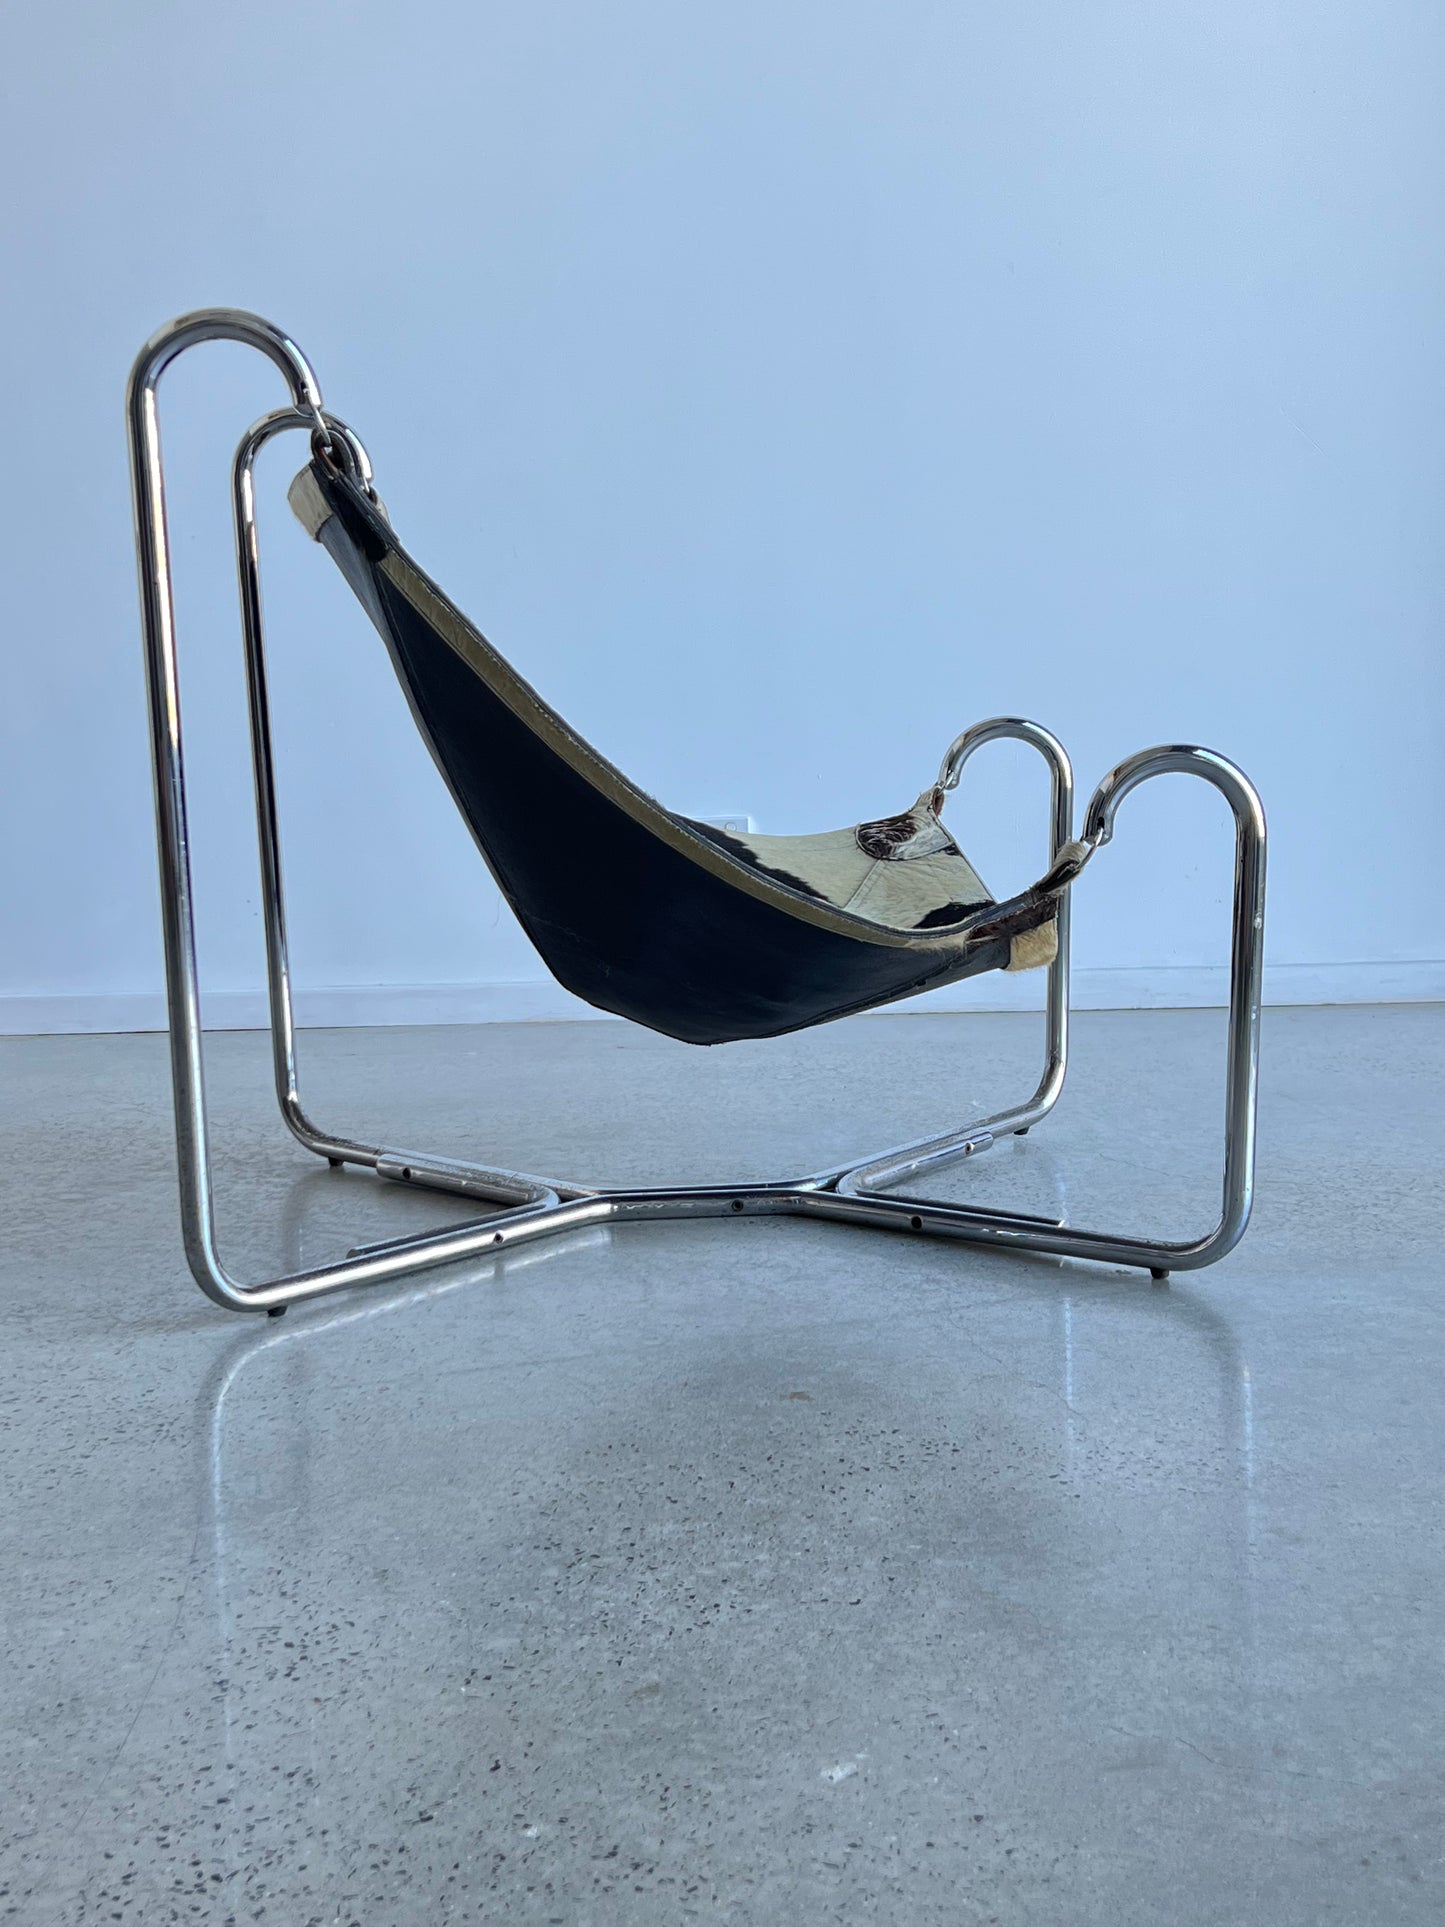 “Baffo” by Gianni Pareschi and Ezio Didone for Busnelli, Cow Leather Chair, 1969